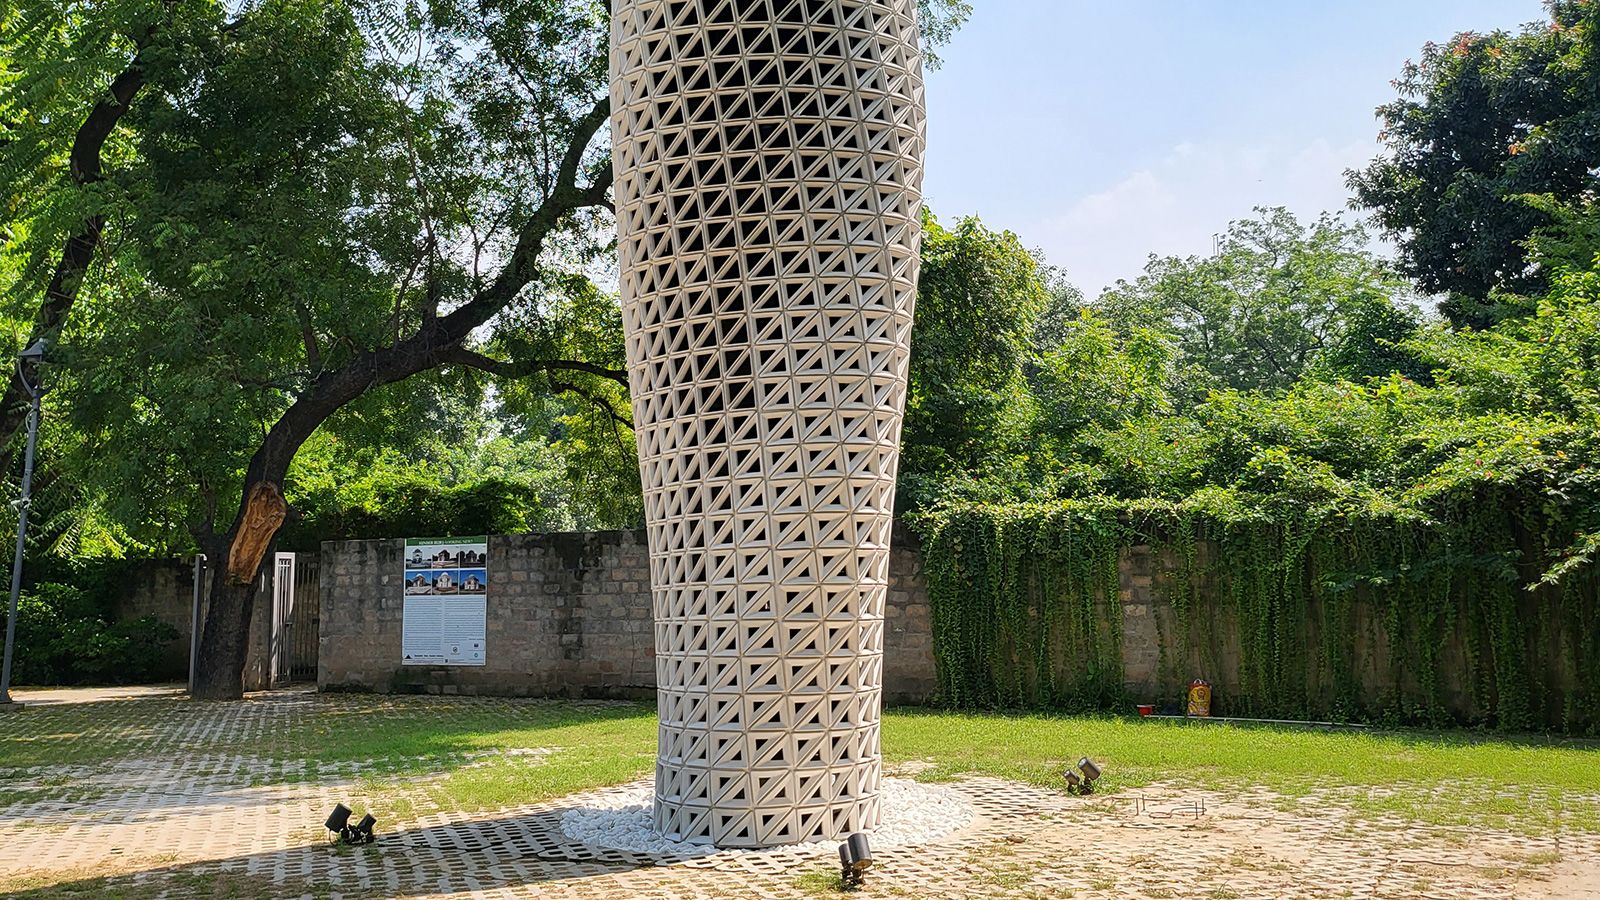 A prototype of the Verto air filtration tower was installed in New Delhi’s Sunder Nursery park.